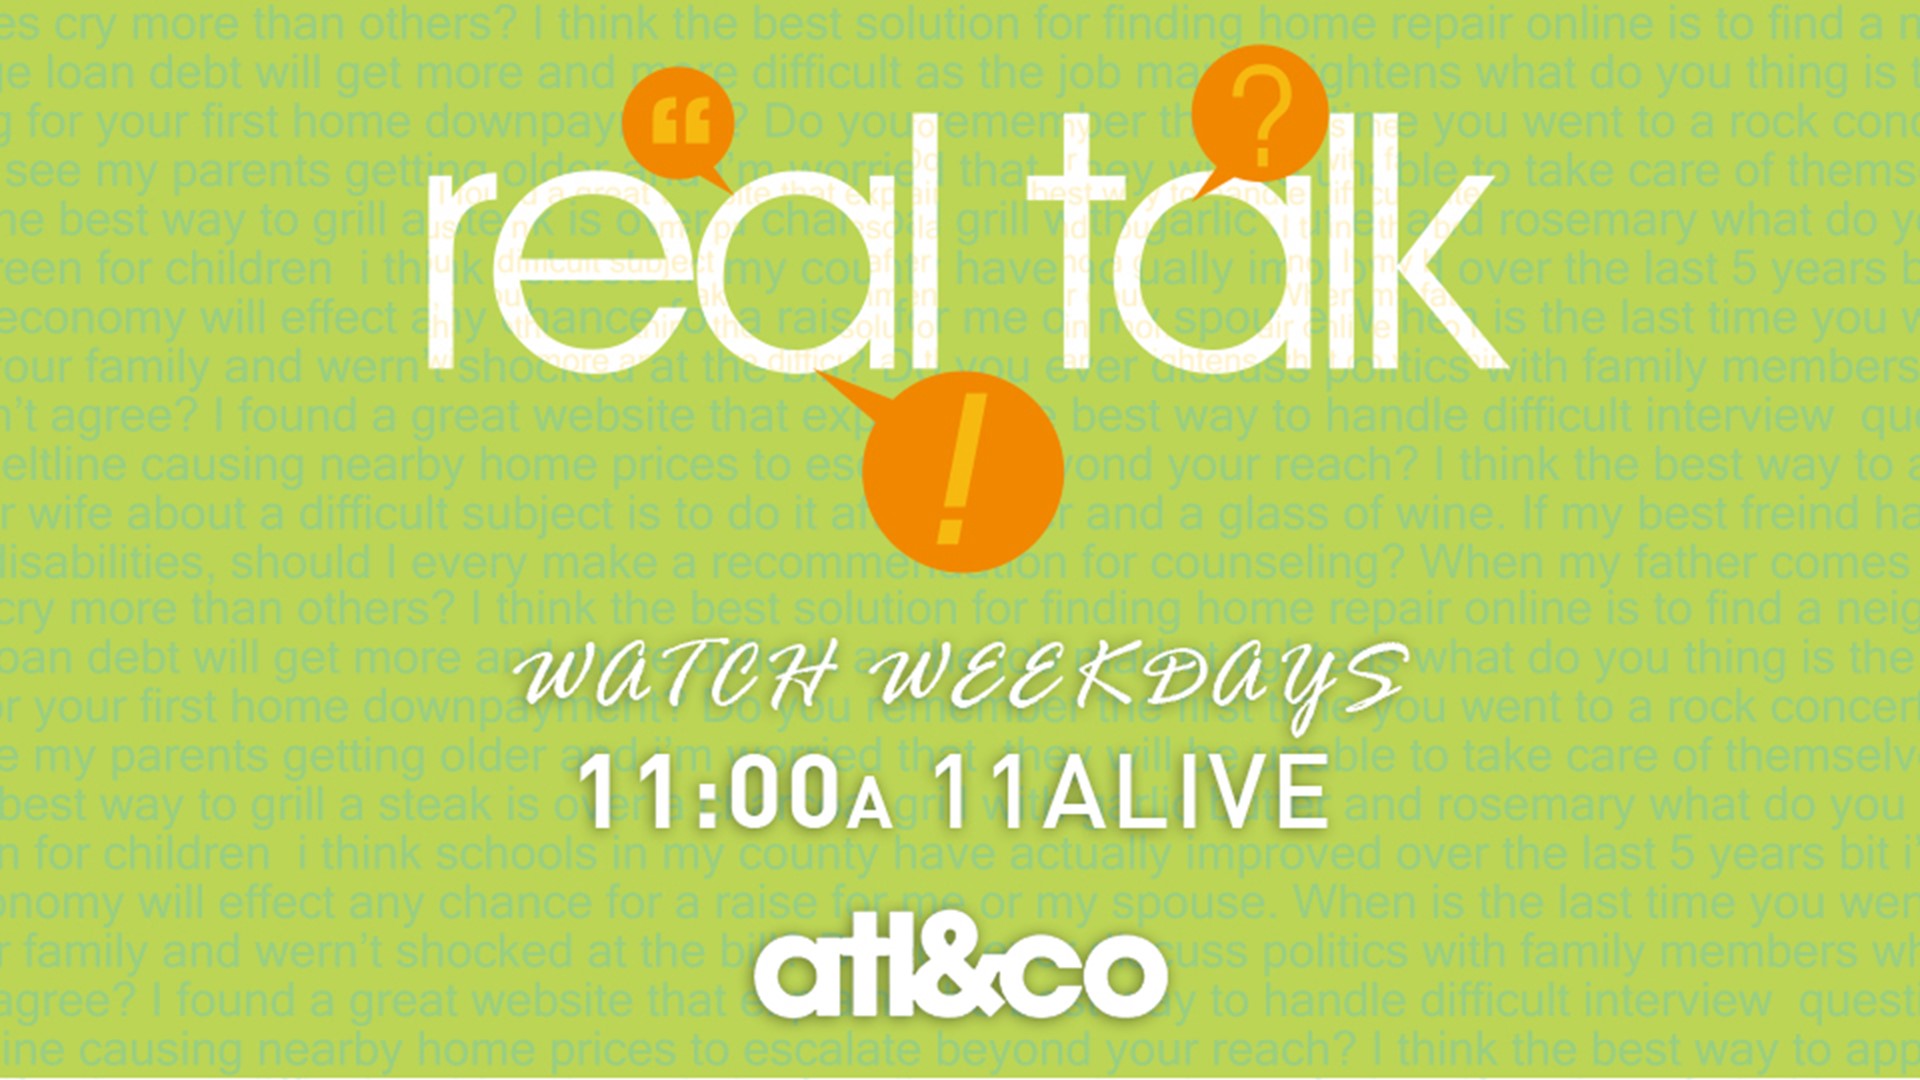 Join our Real Talk discussion on 'Atlanta & Company'